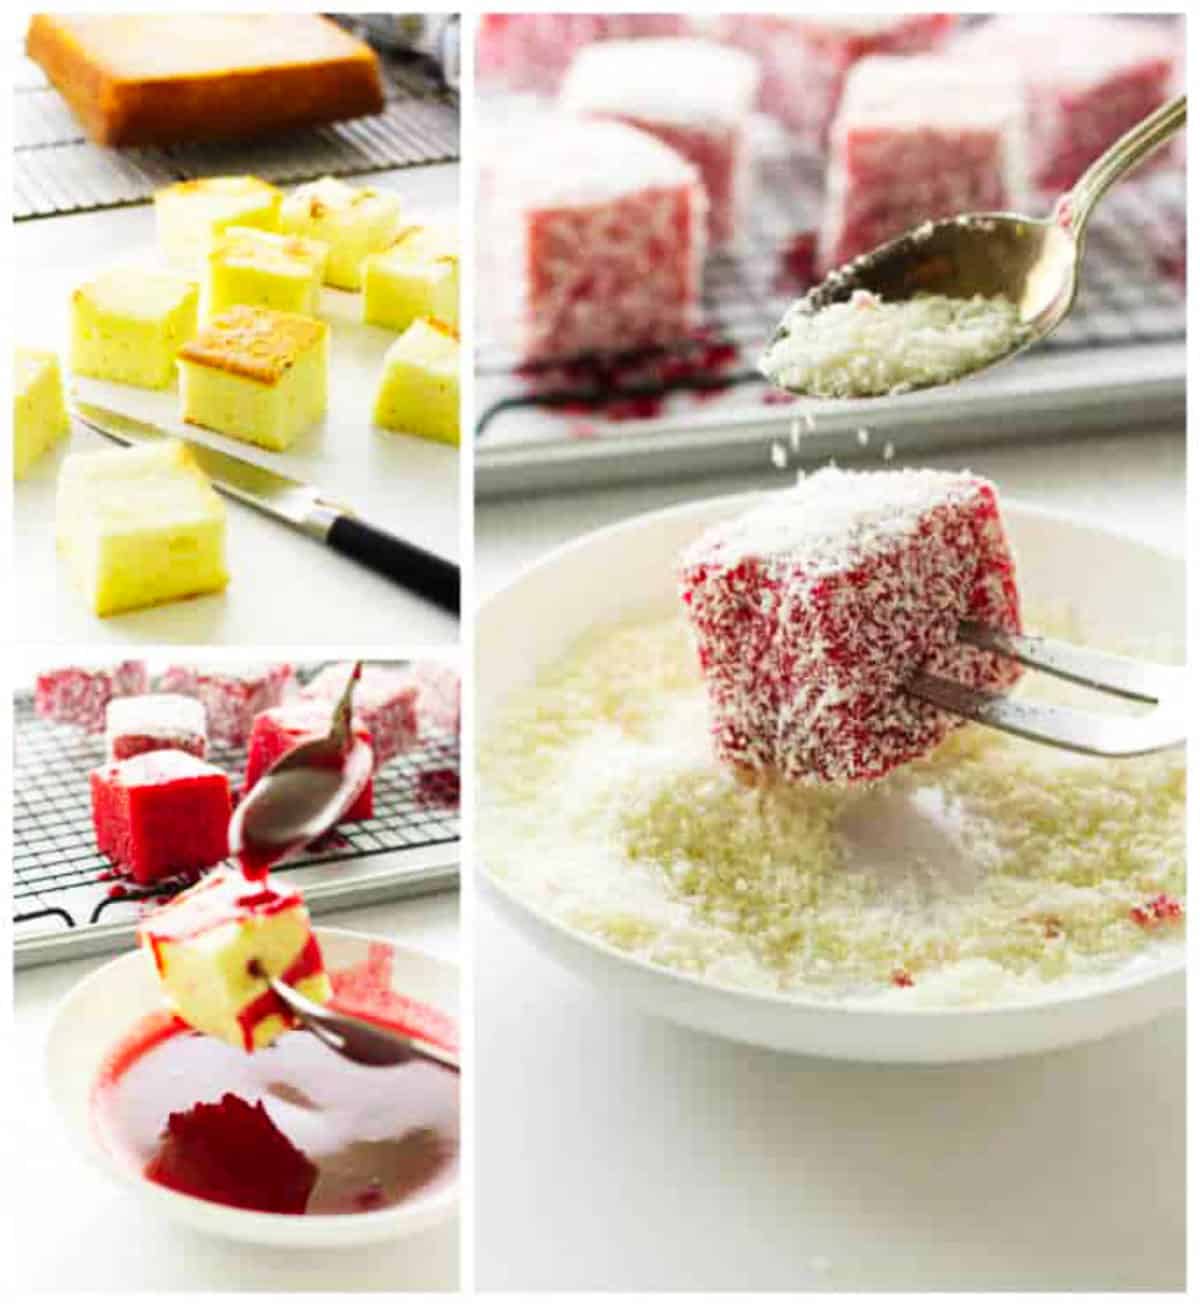 step by step process of making raspberry lamingtons.